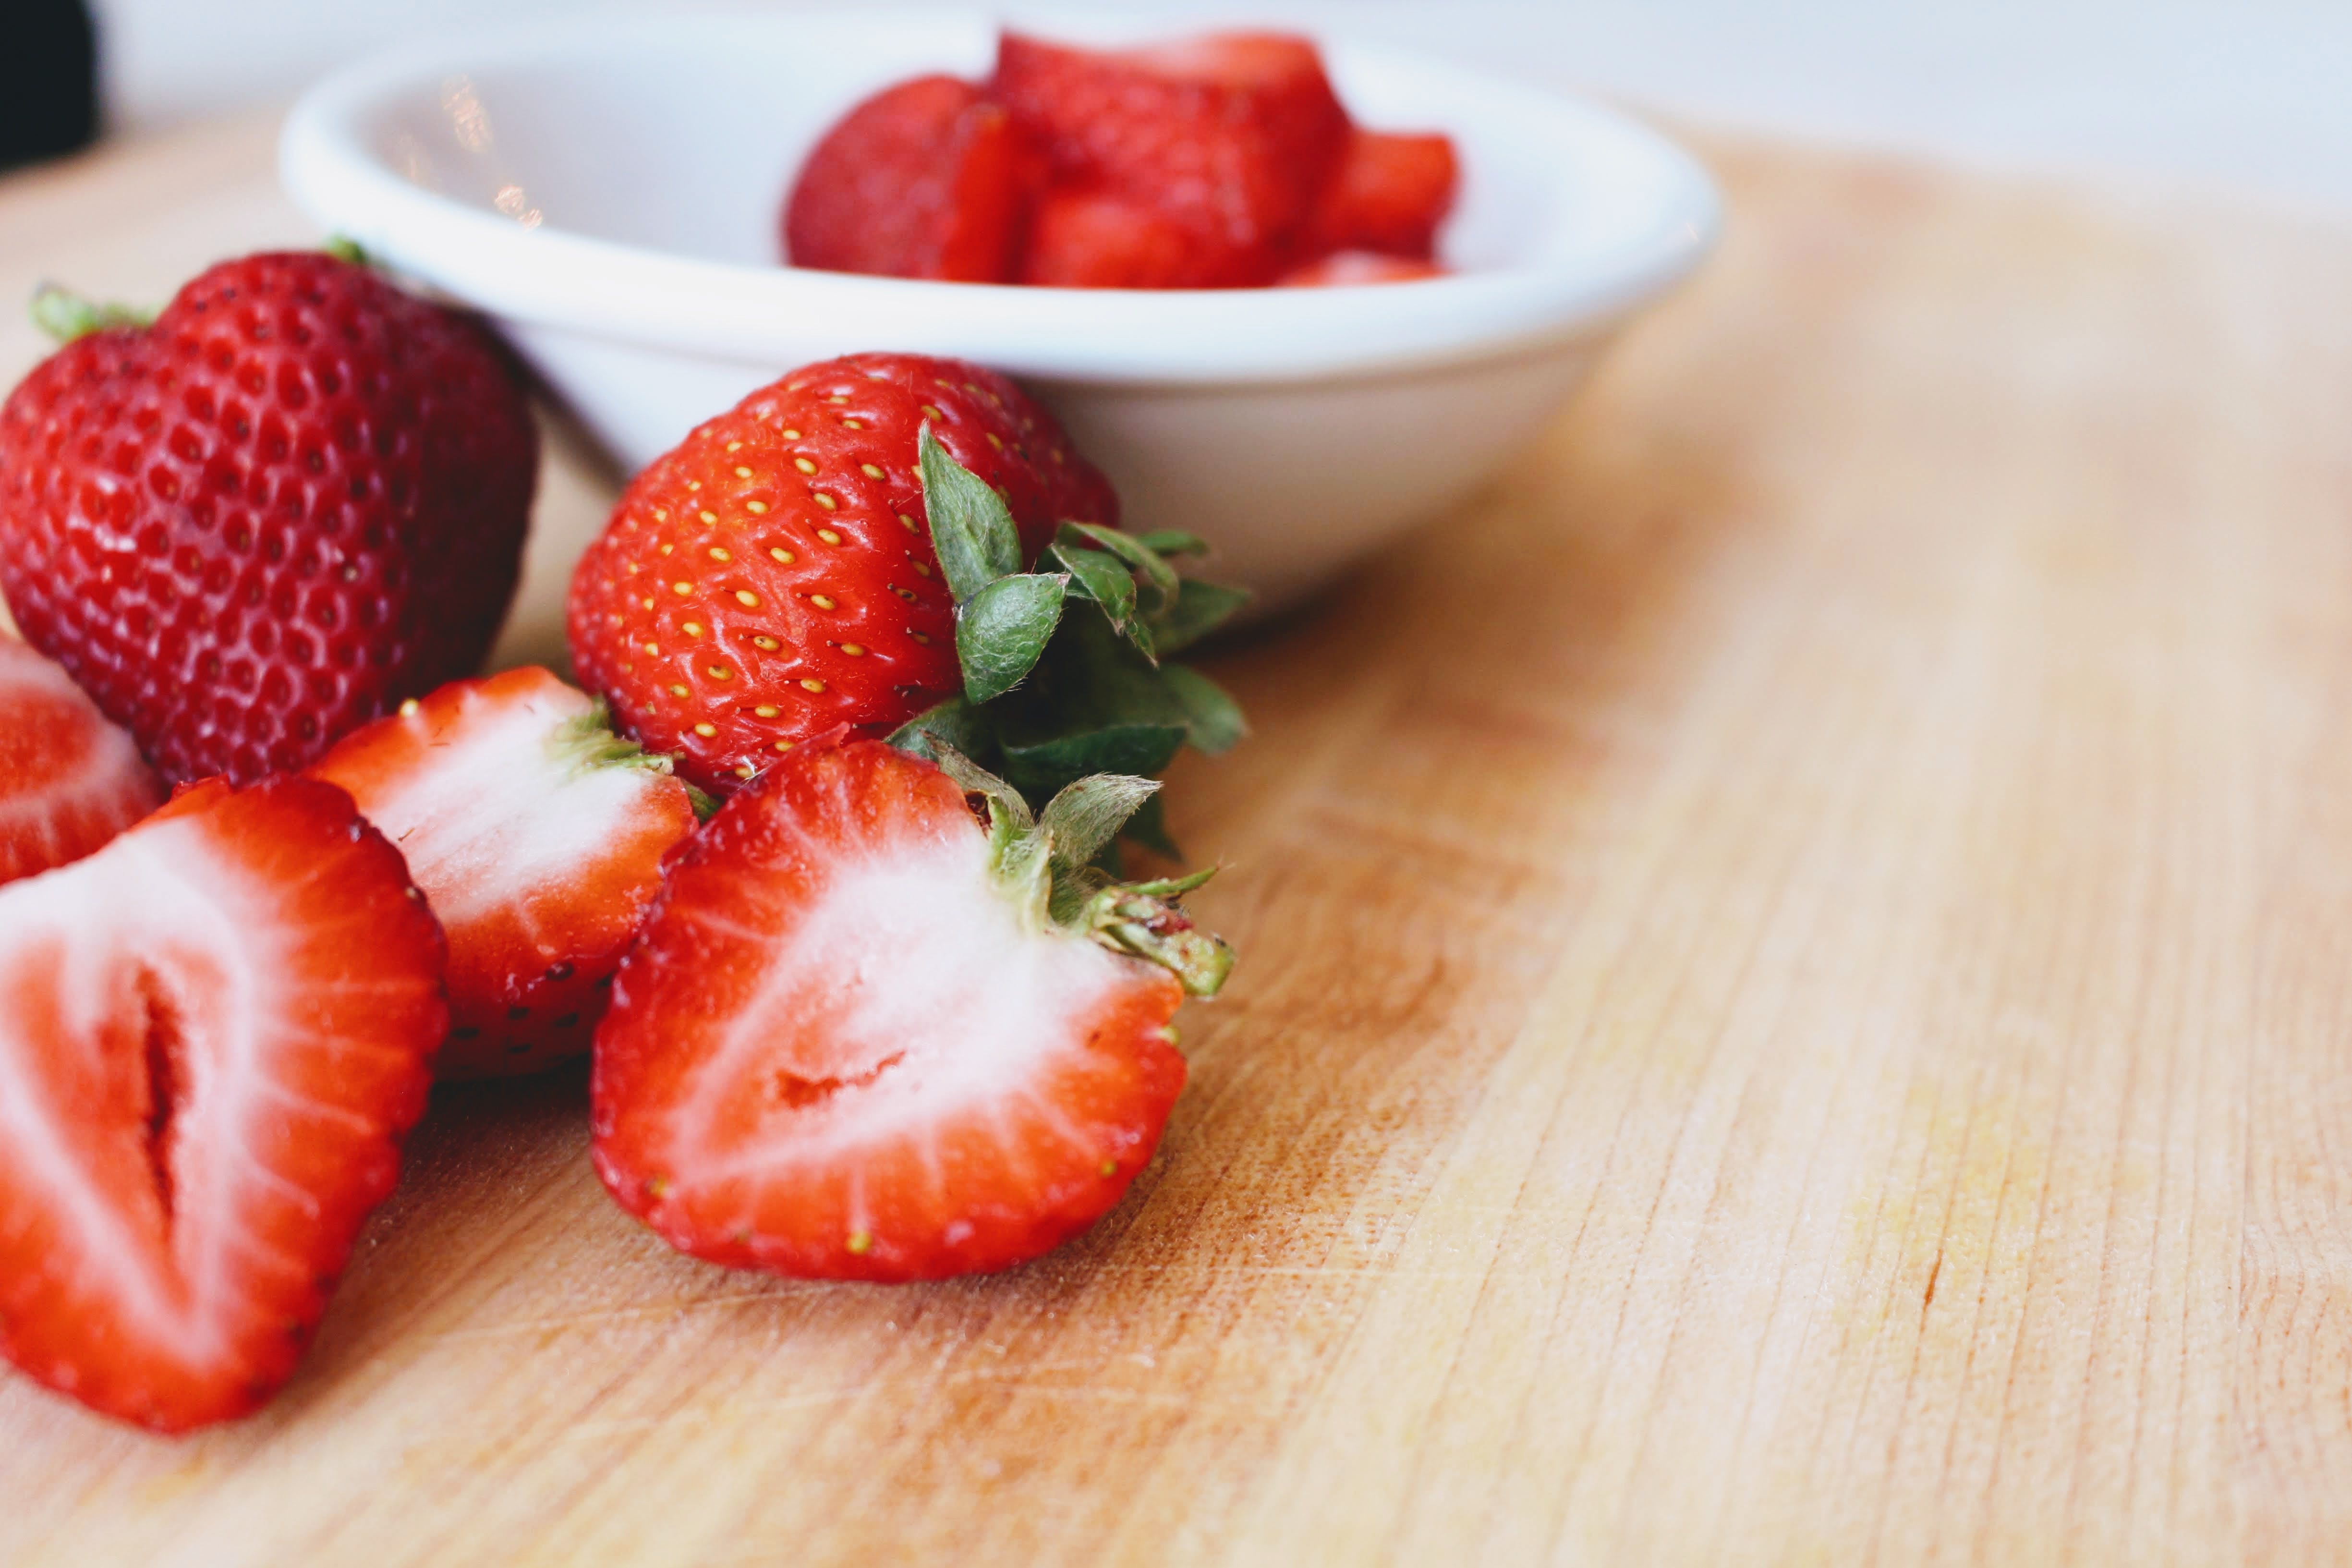 What make strawberries one of the “Dirty Dozen?” Let’s take a look under the microscope.